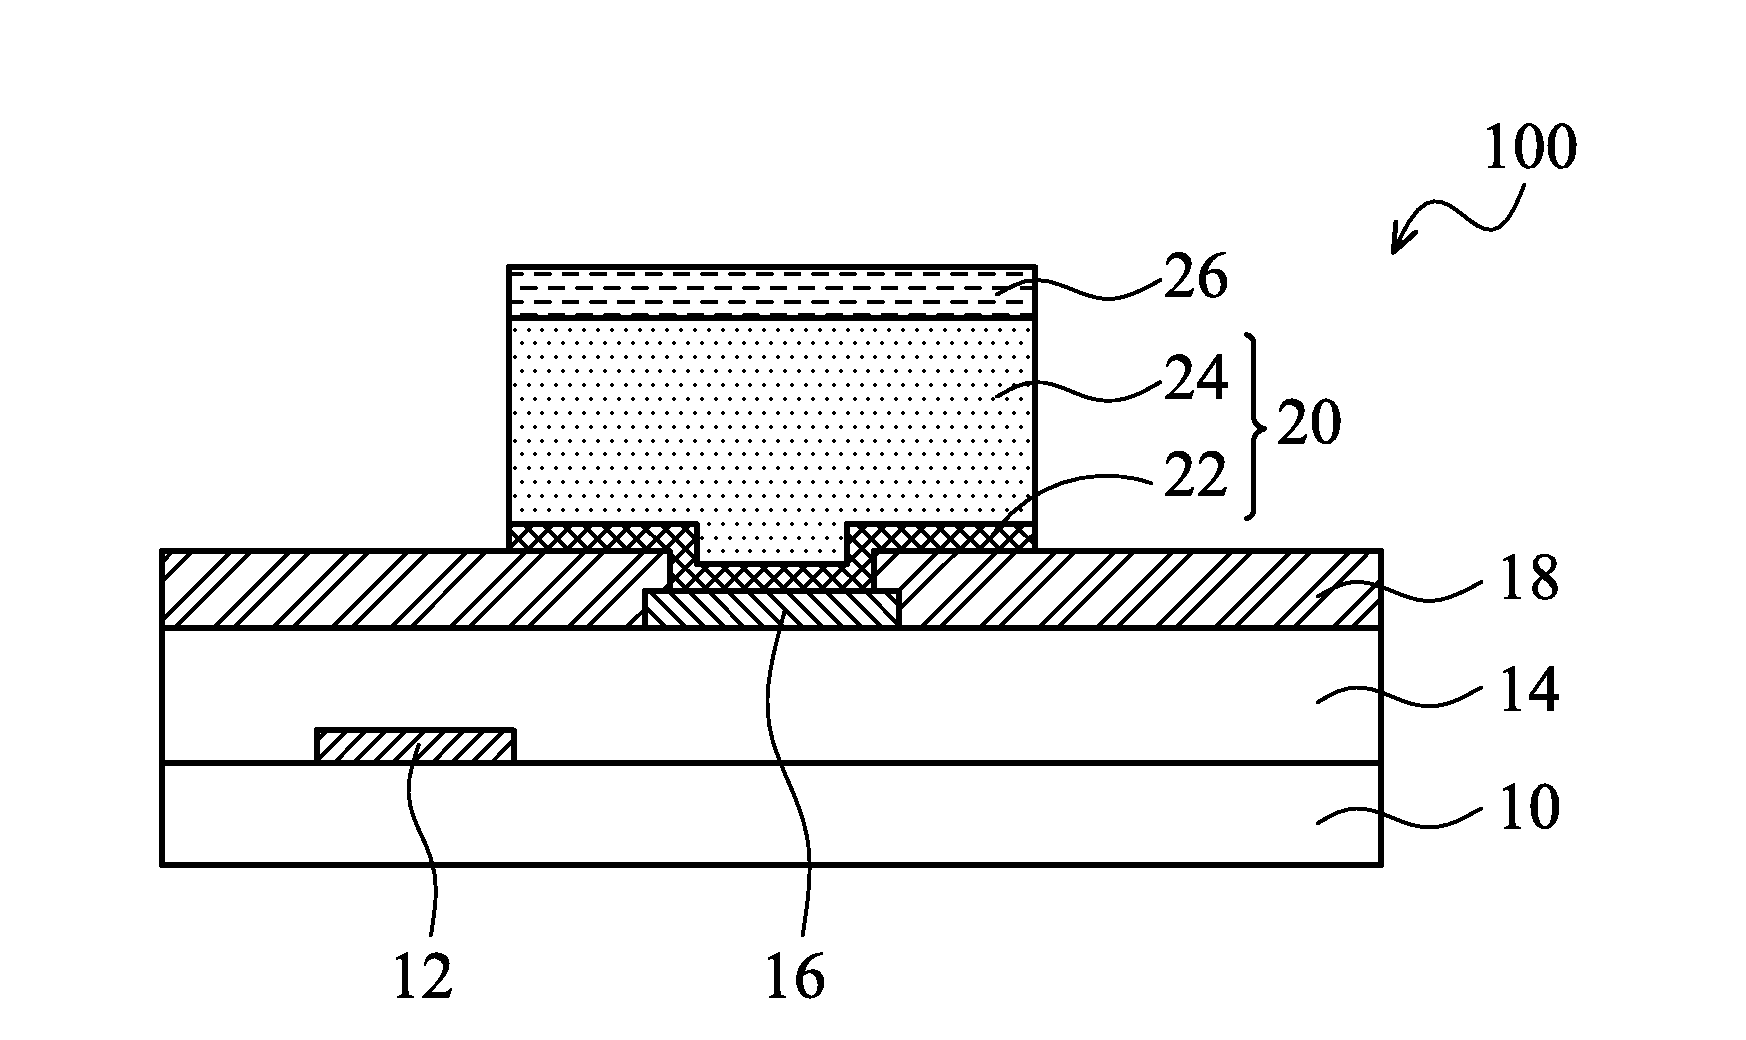 Elongated bump structure in semiconductor device